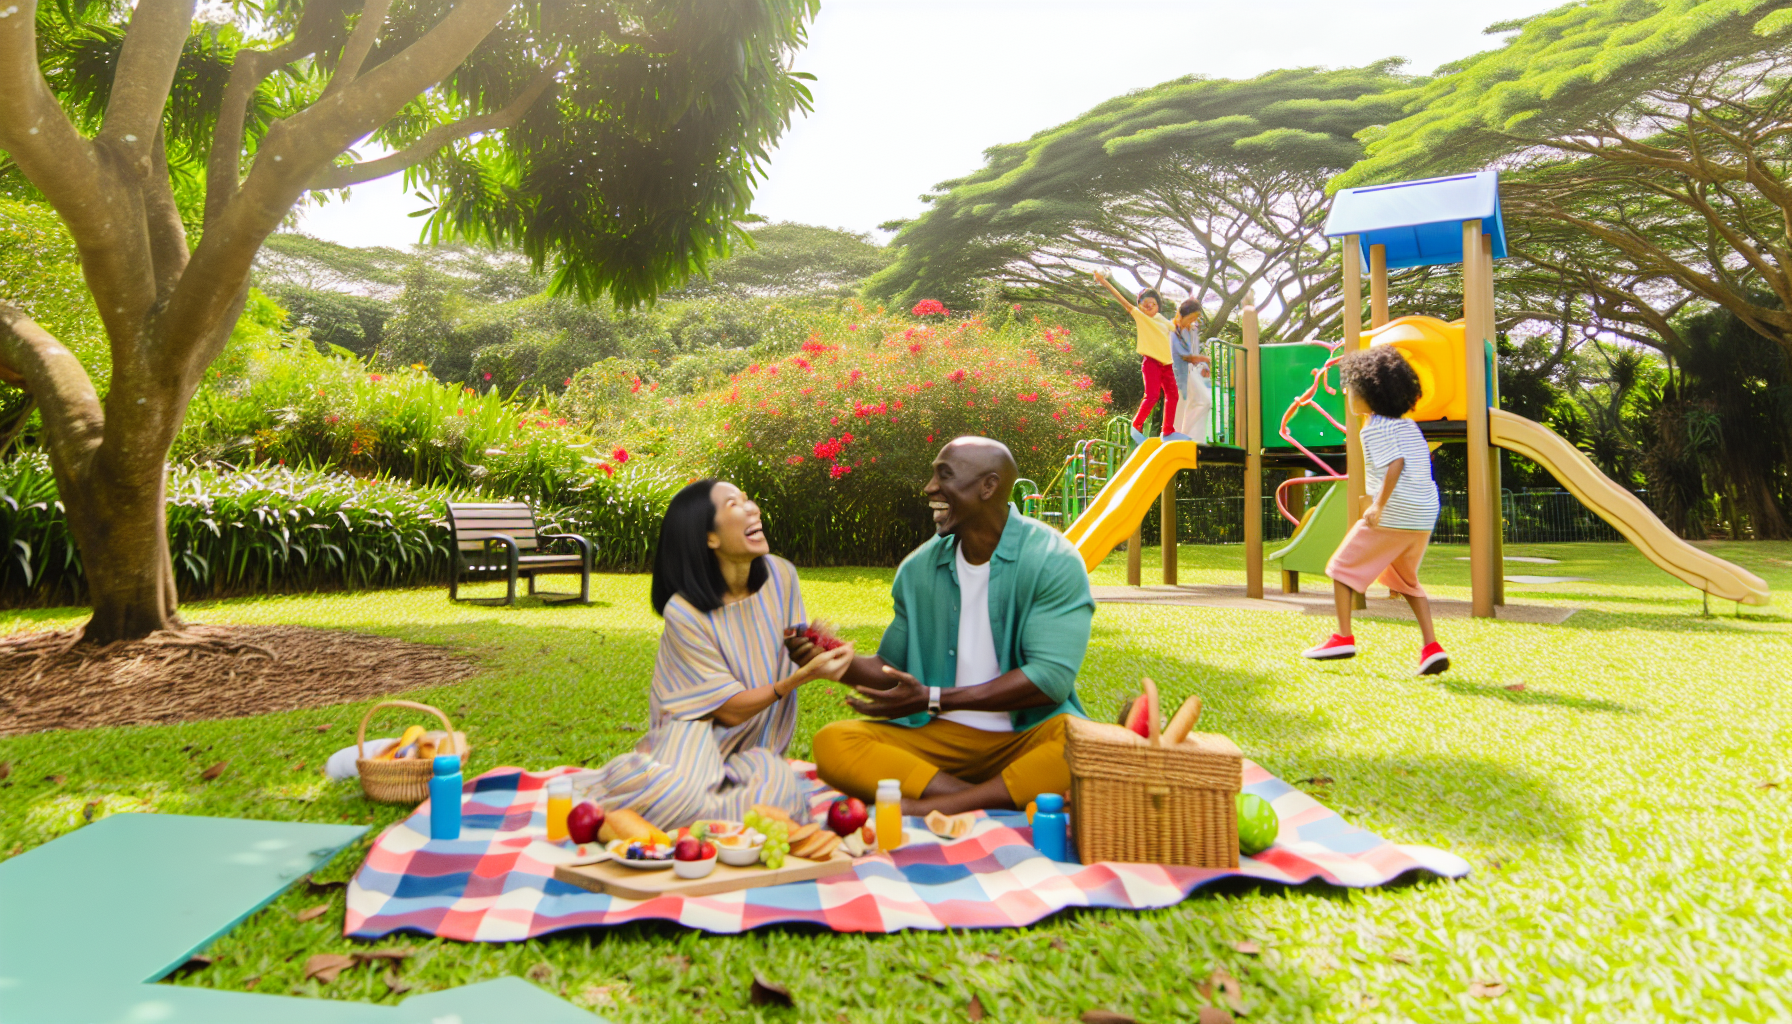 Family having a picnic in a local park